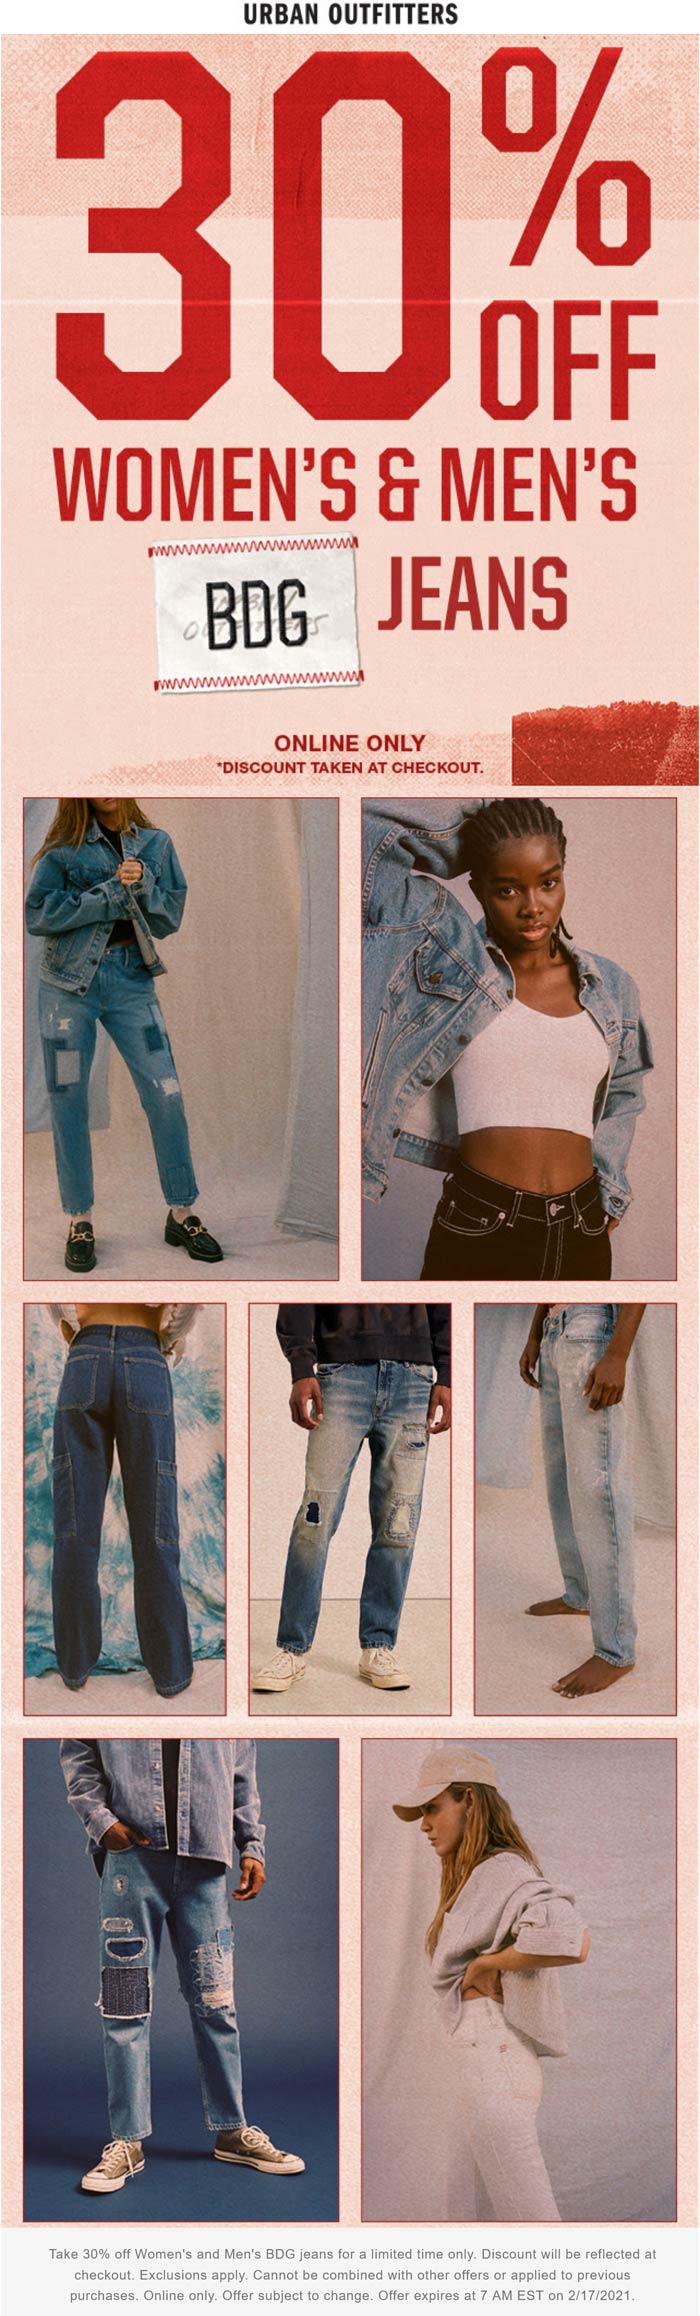 30% off BDG jeans online today at Urban Outfitters #urbanoutfitters ...